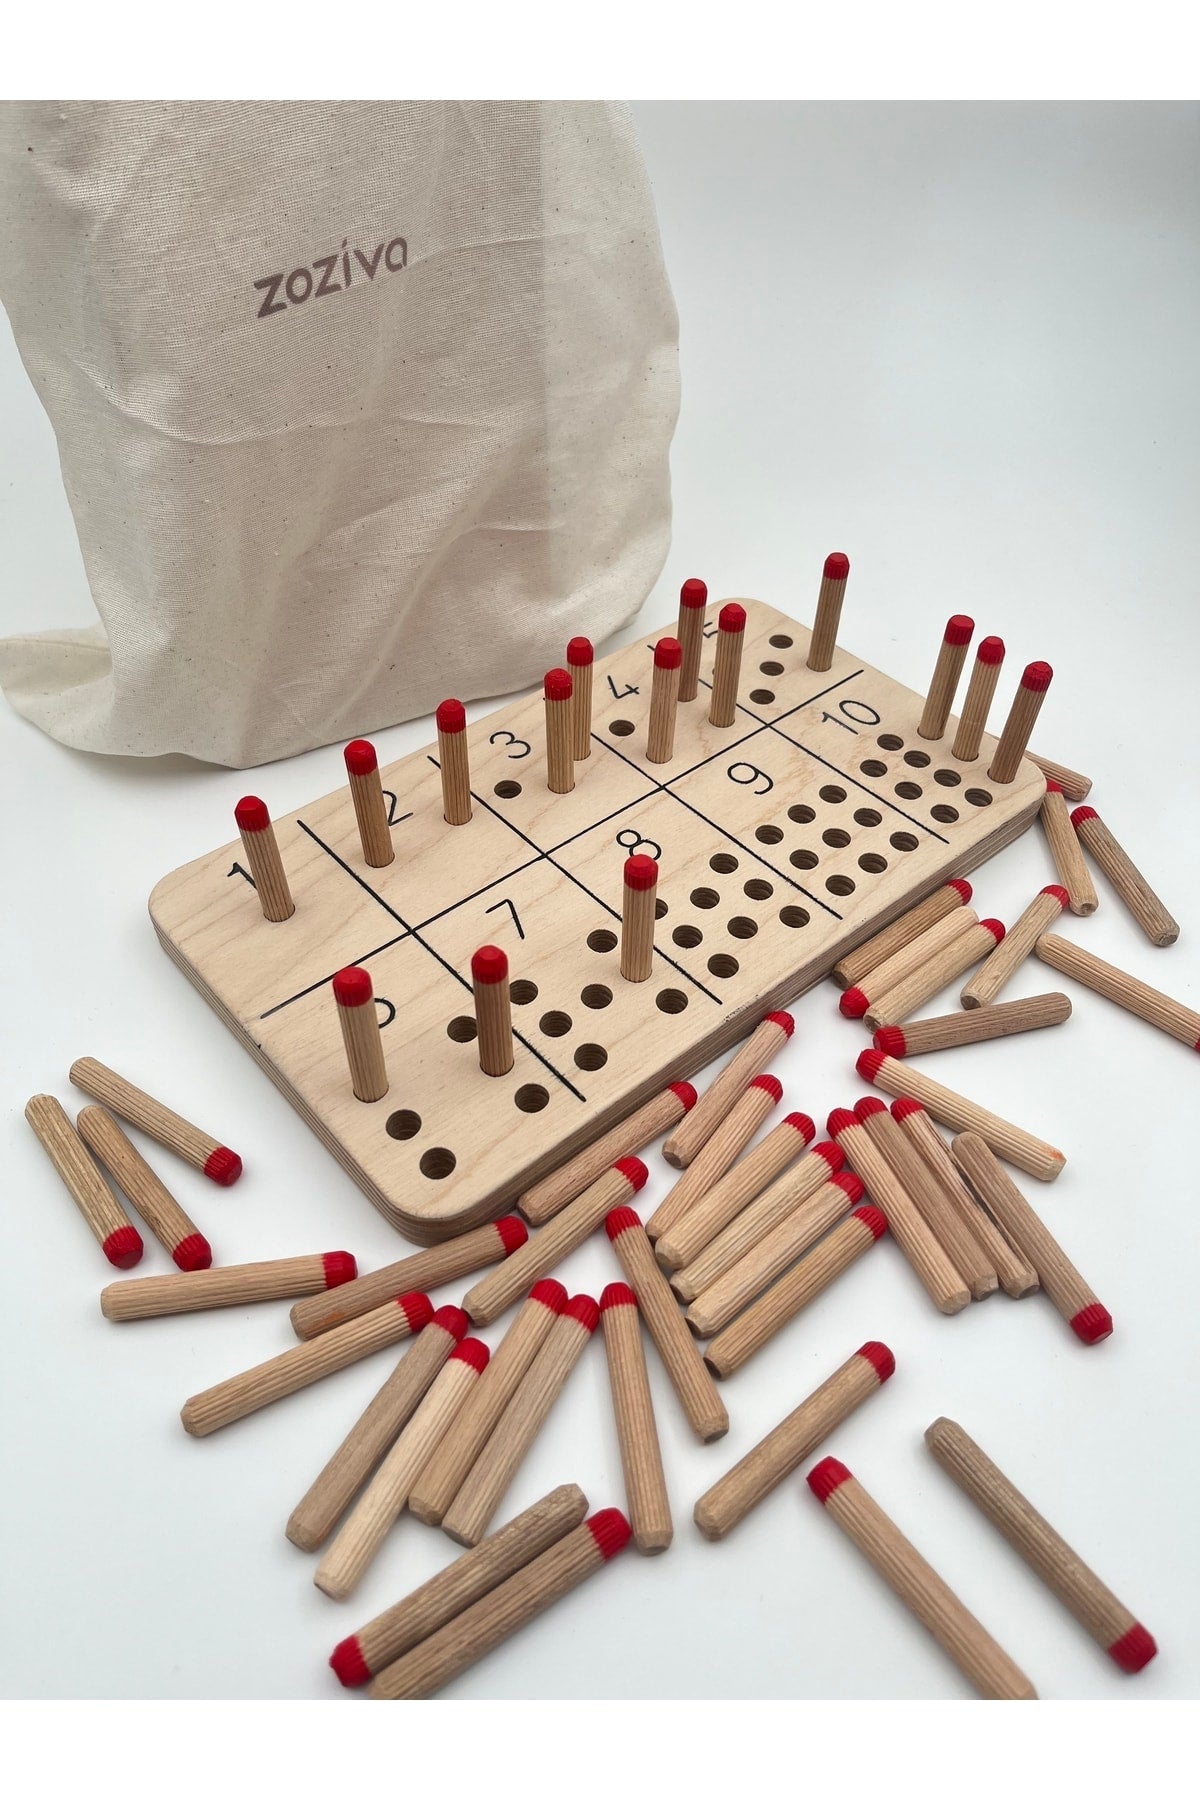 Number Learning Toy With Montessori Sticks, Counting Skill Educational Wooden Material